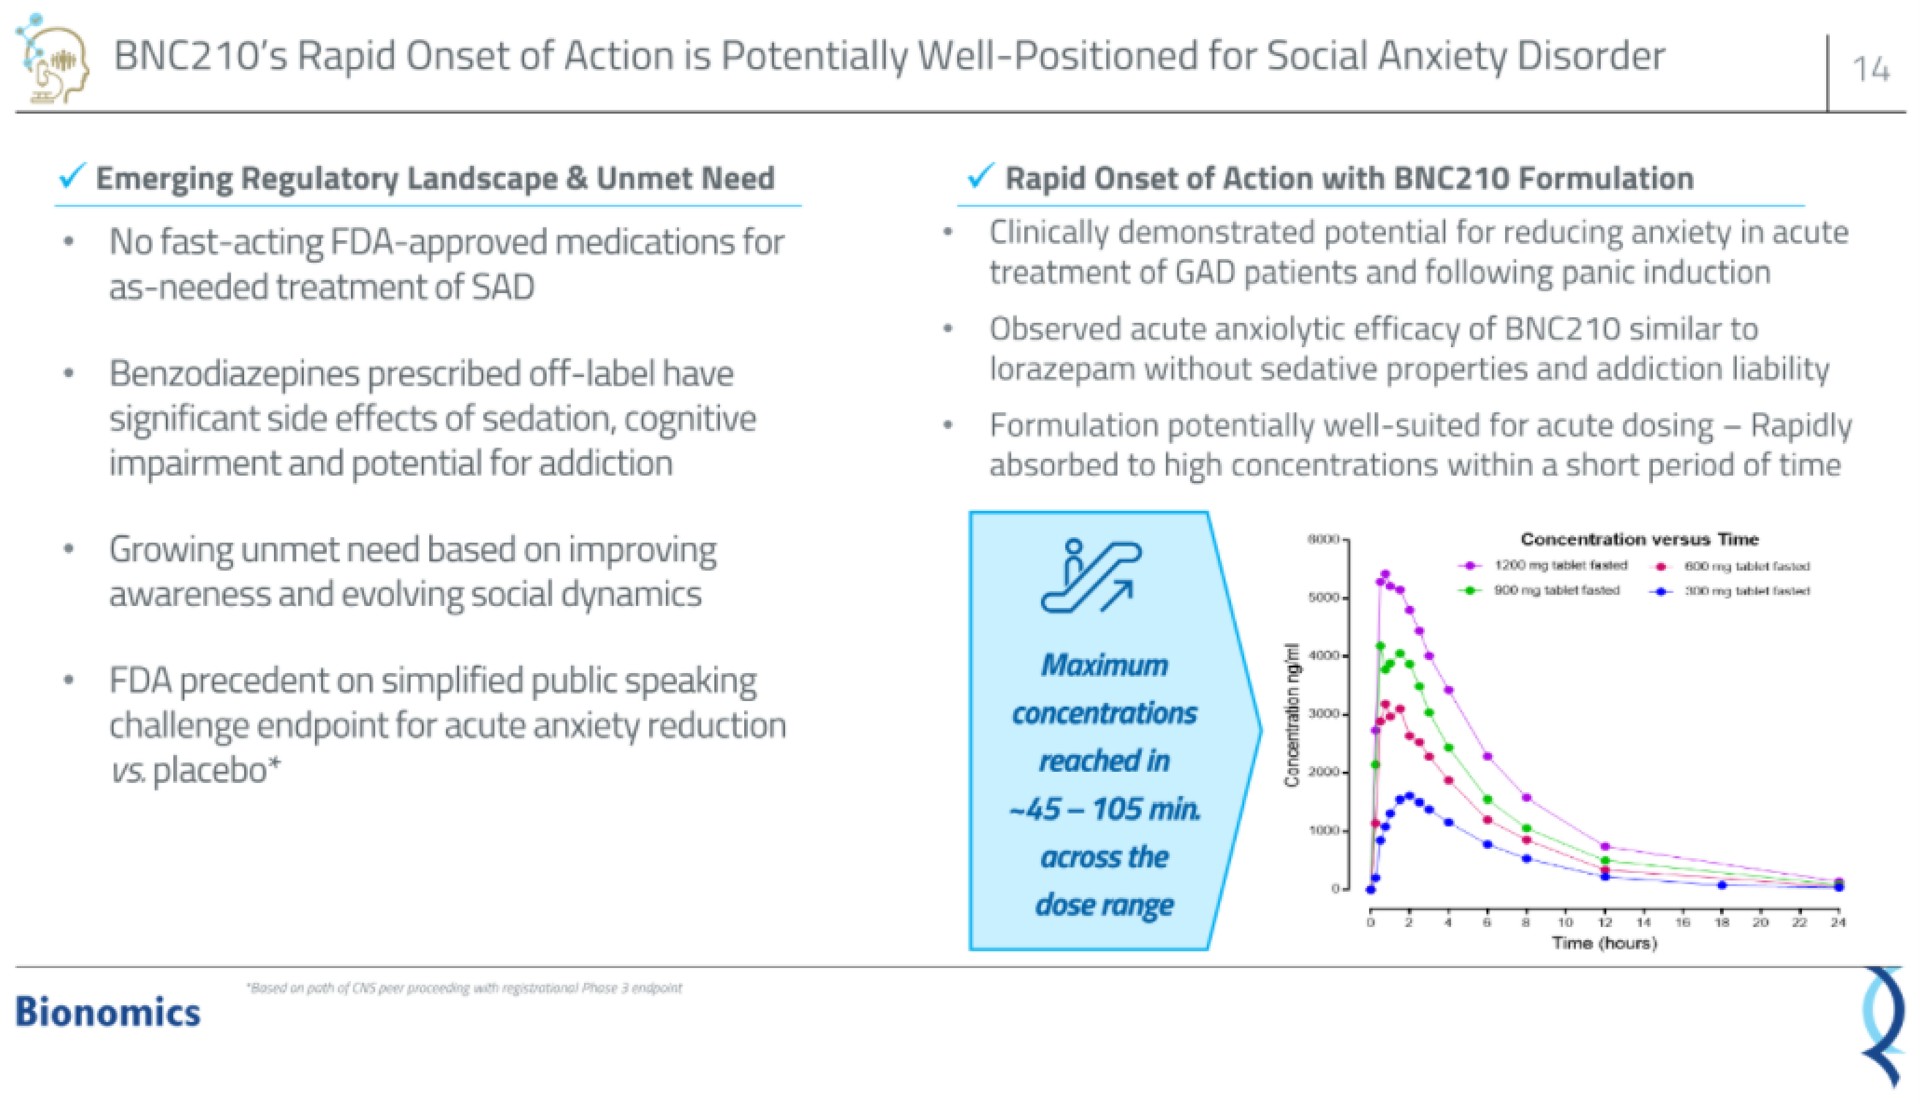 rapid onset of action is potentially well positioned for social anxiety disorder | Bionomics